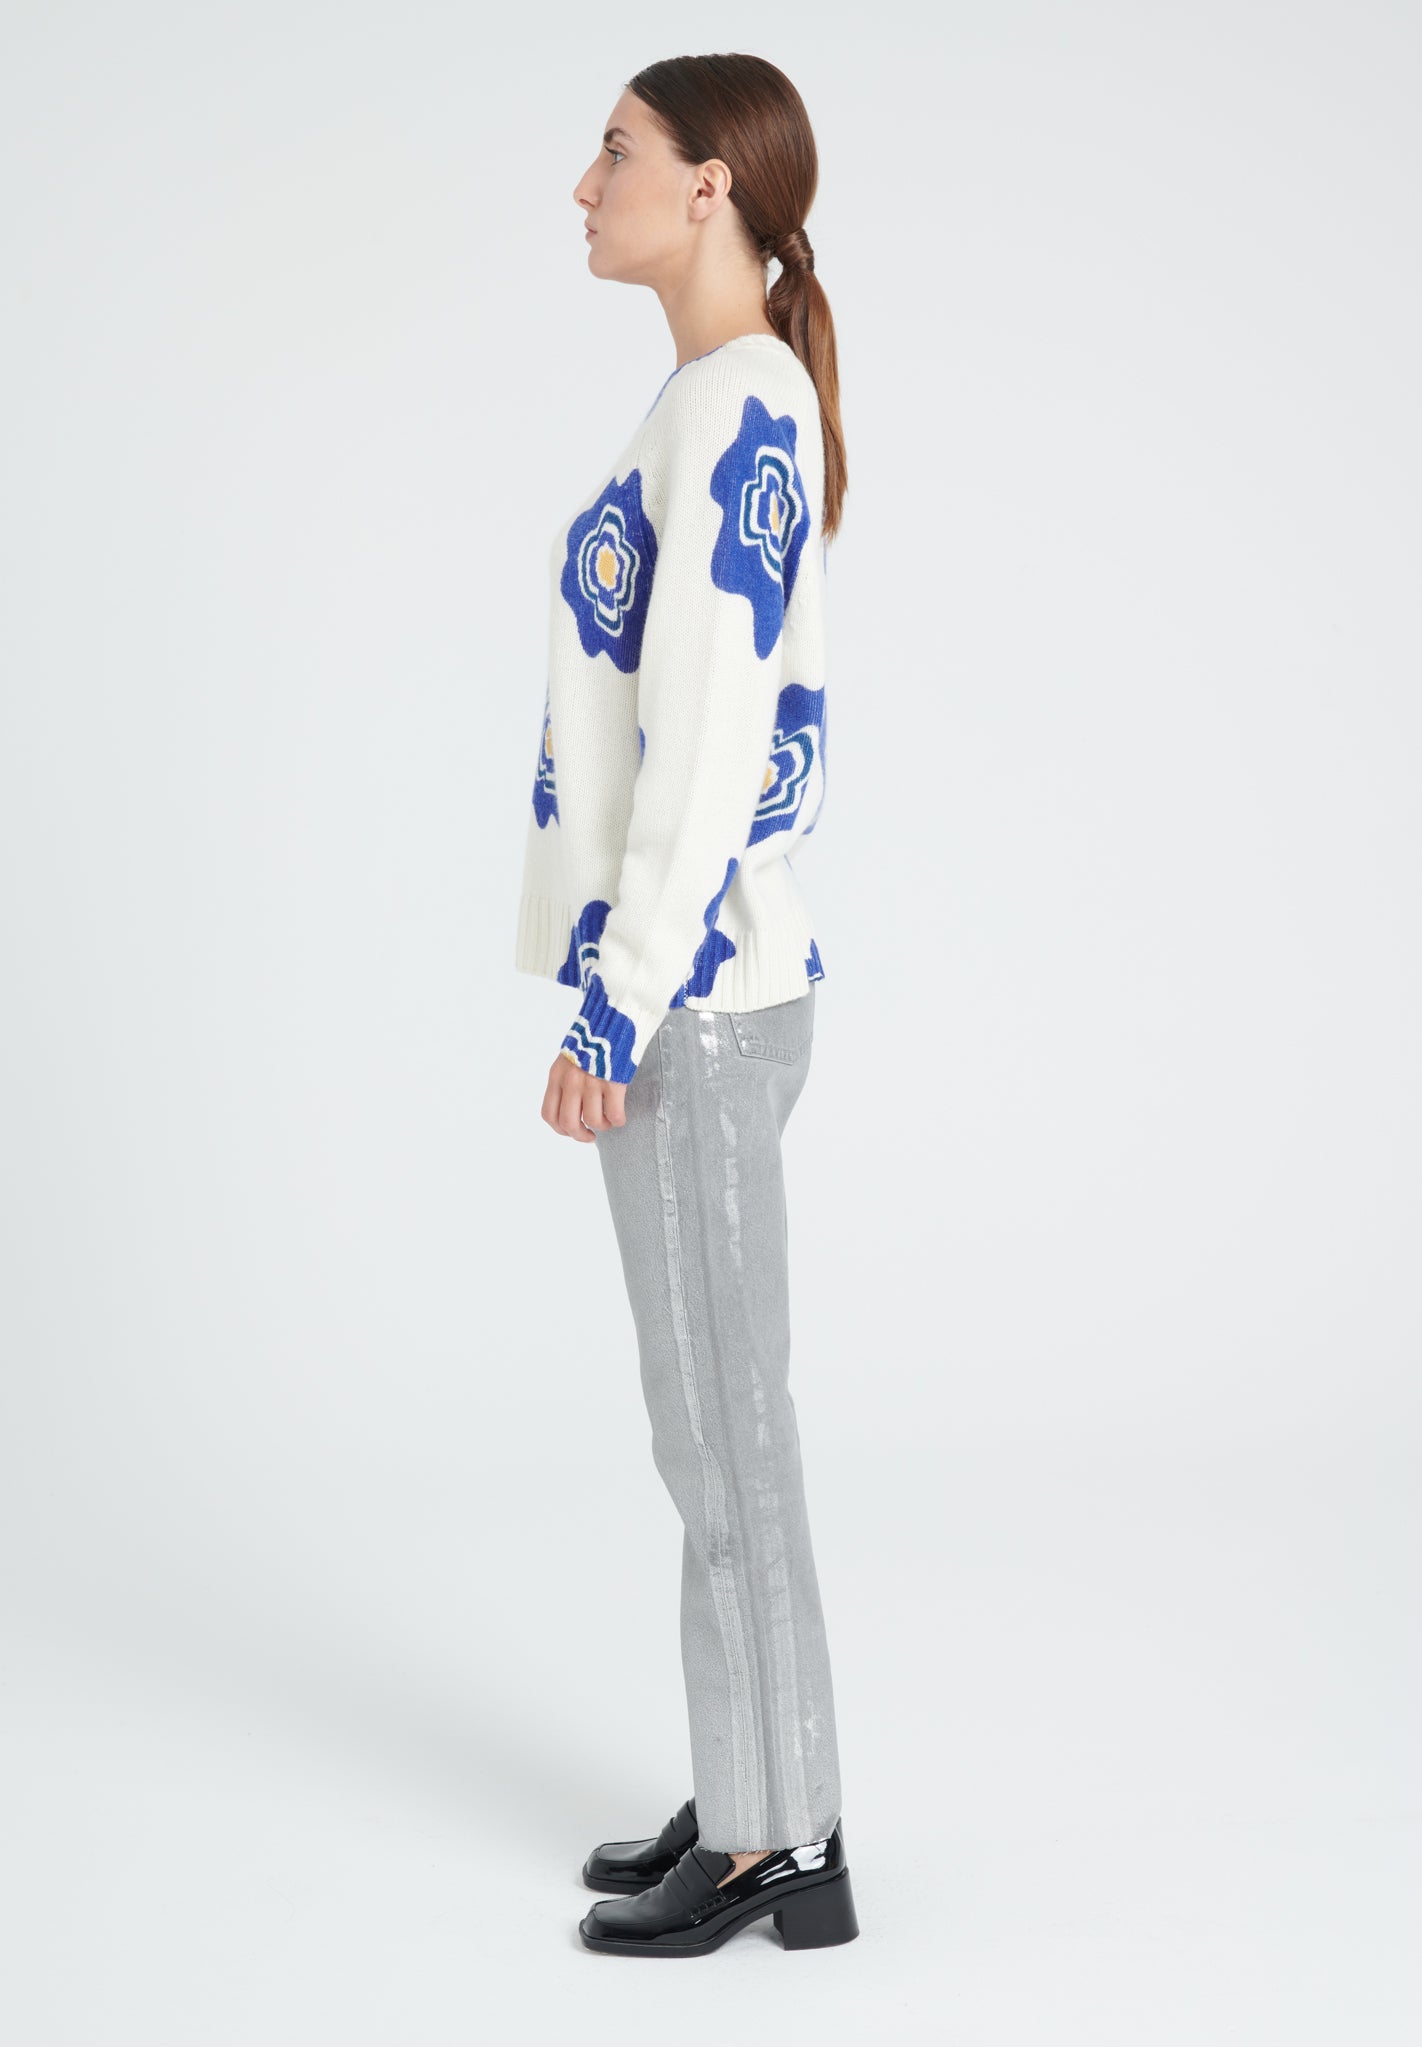 ZAYA 20 Round neck sweater with raglan sleeves and floral prints in 6-thread ecru cashmere